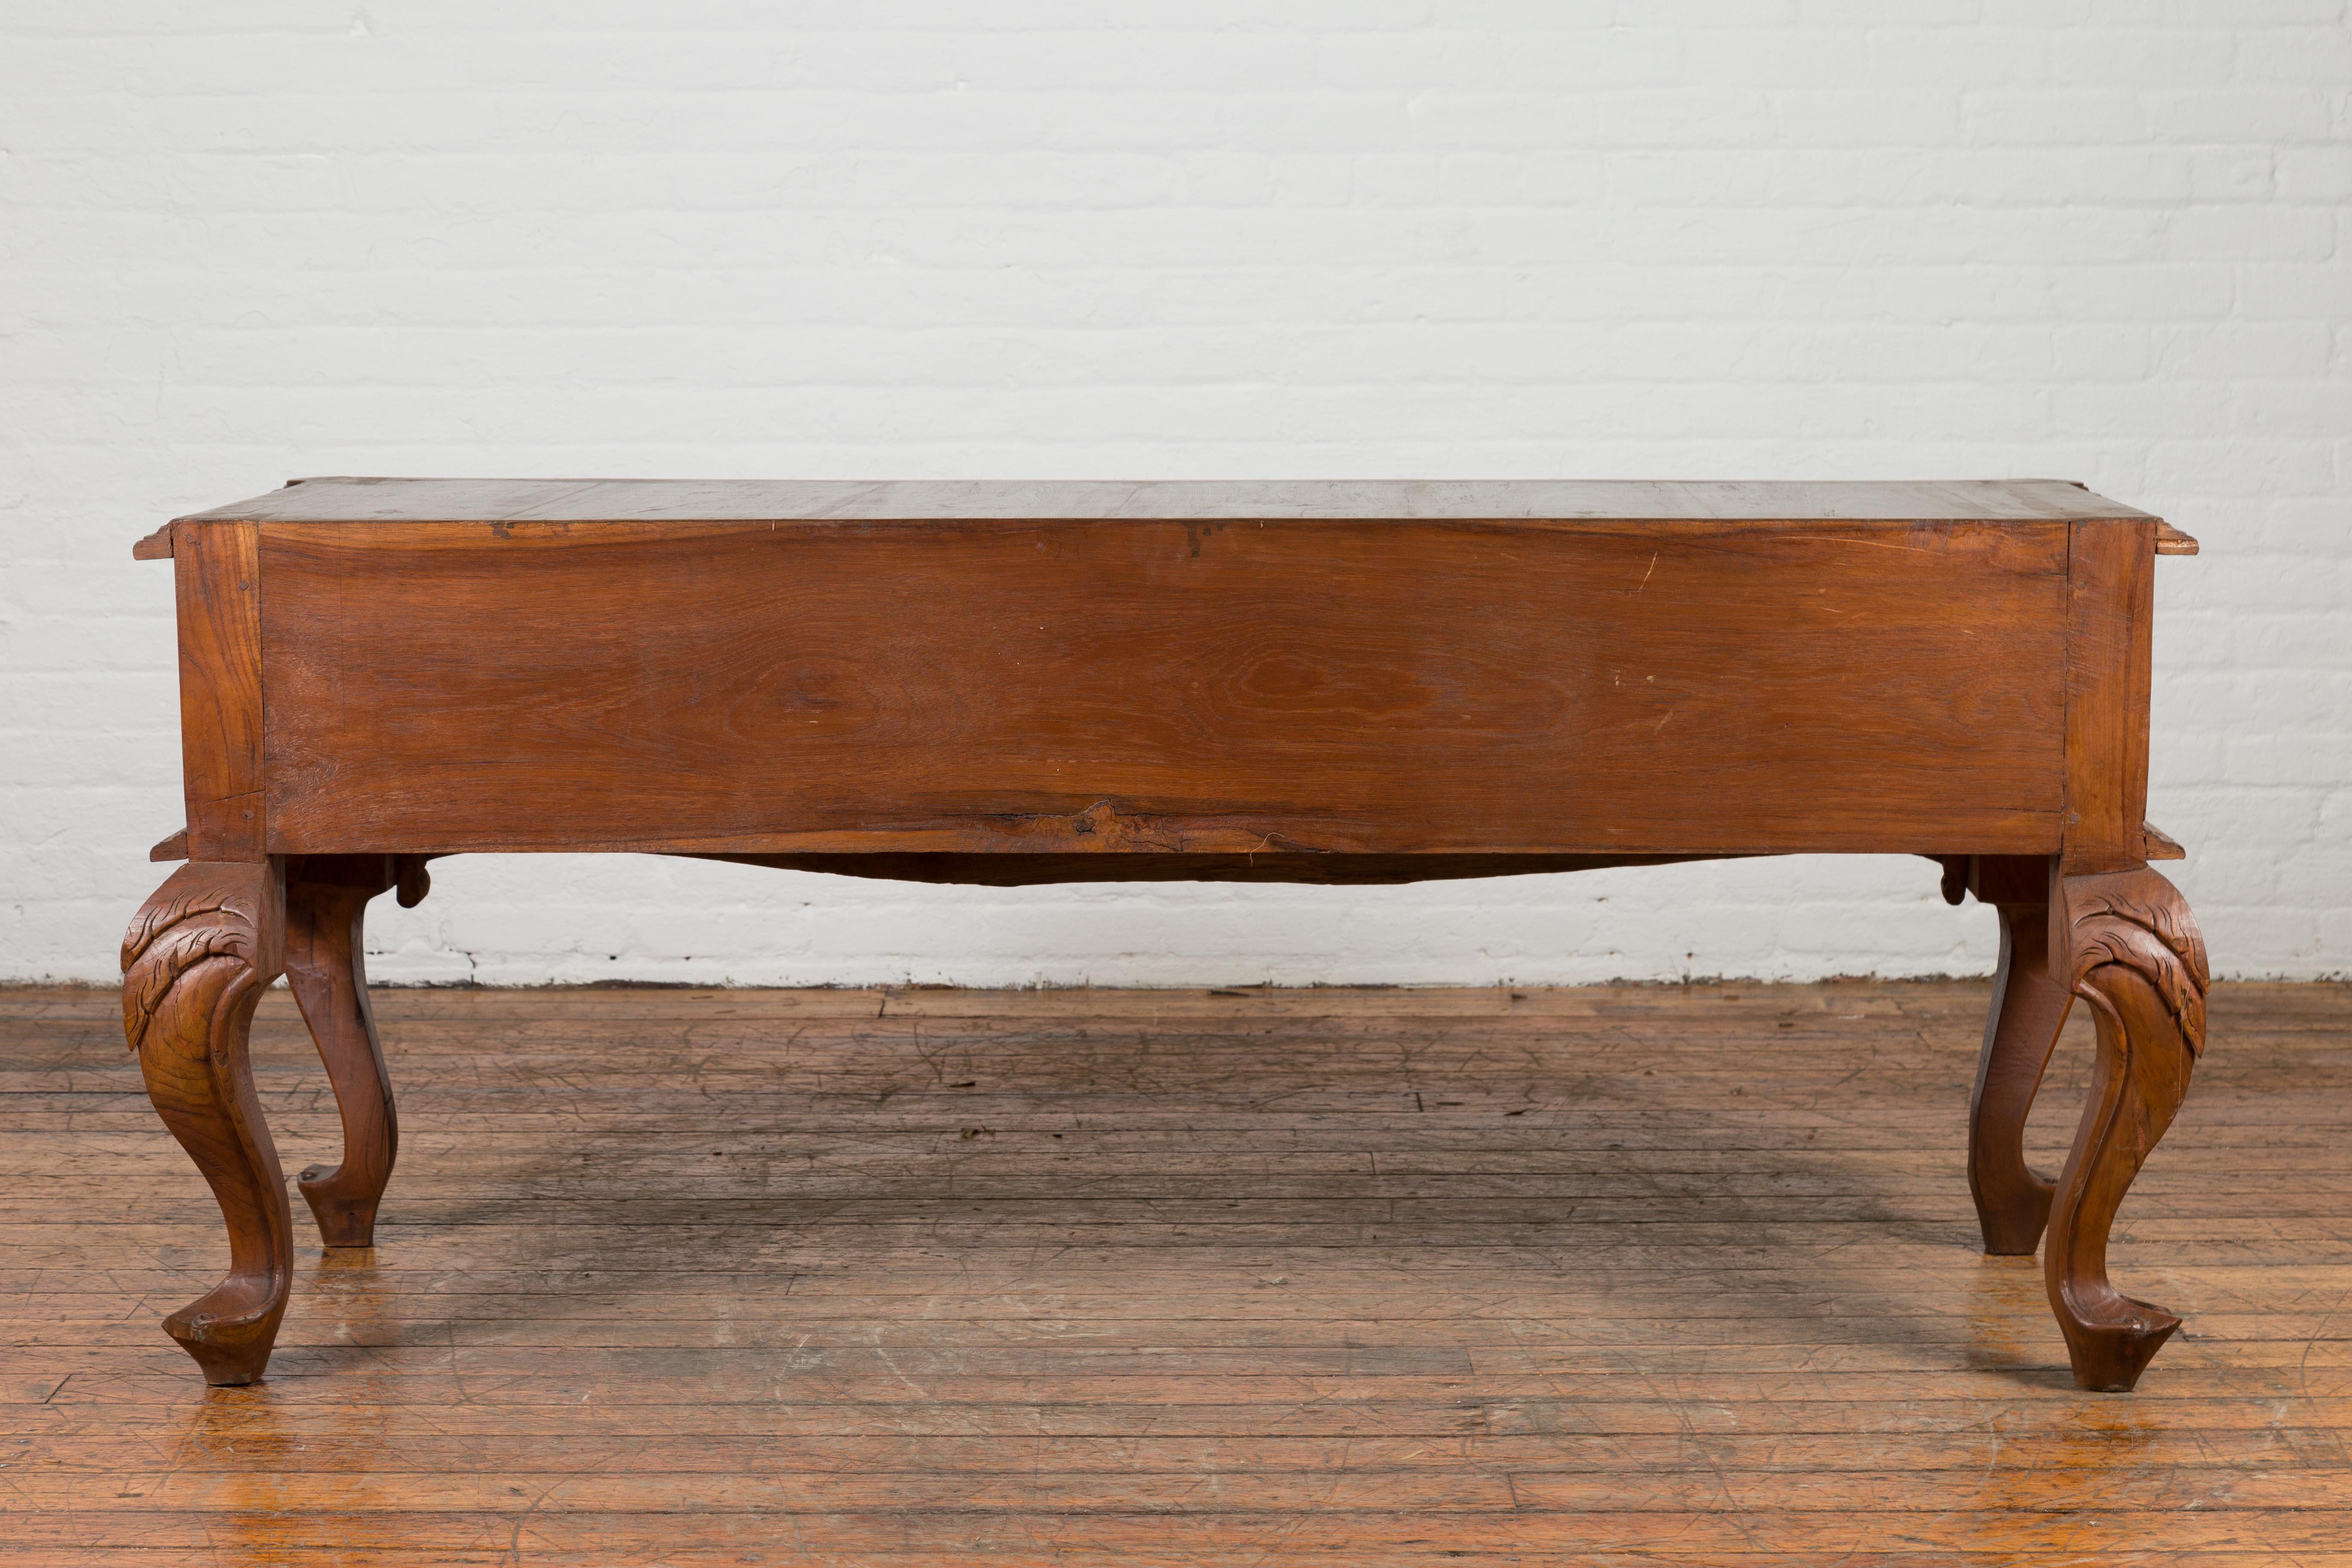 Dutch Colonial Early 20th Century Low Table with Two Drawers and Cabriole Legs For Sale 7